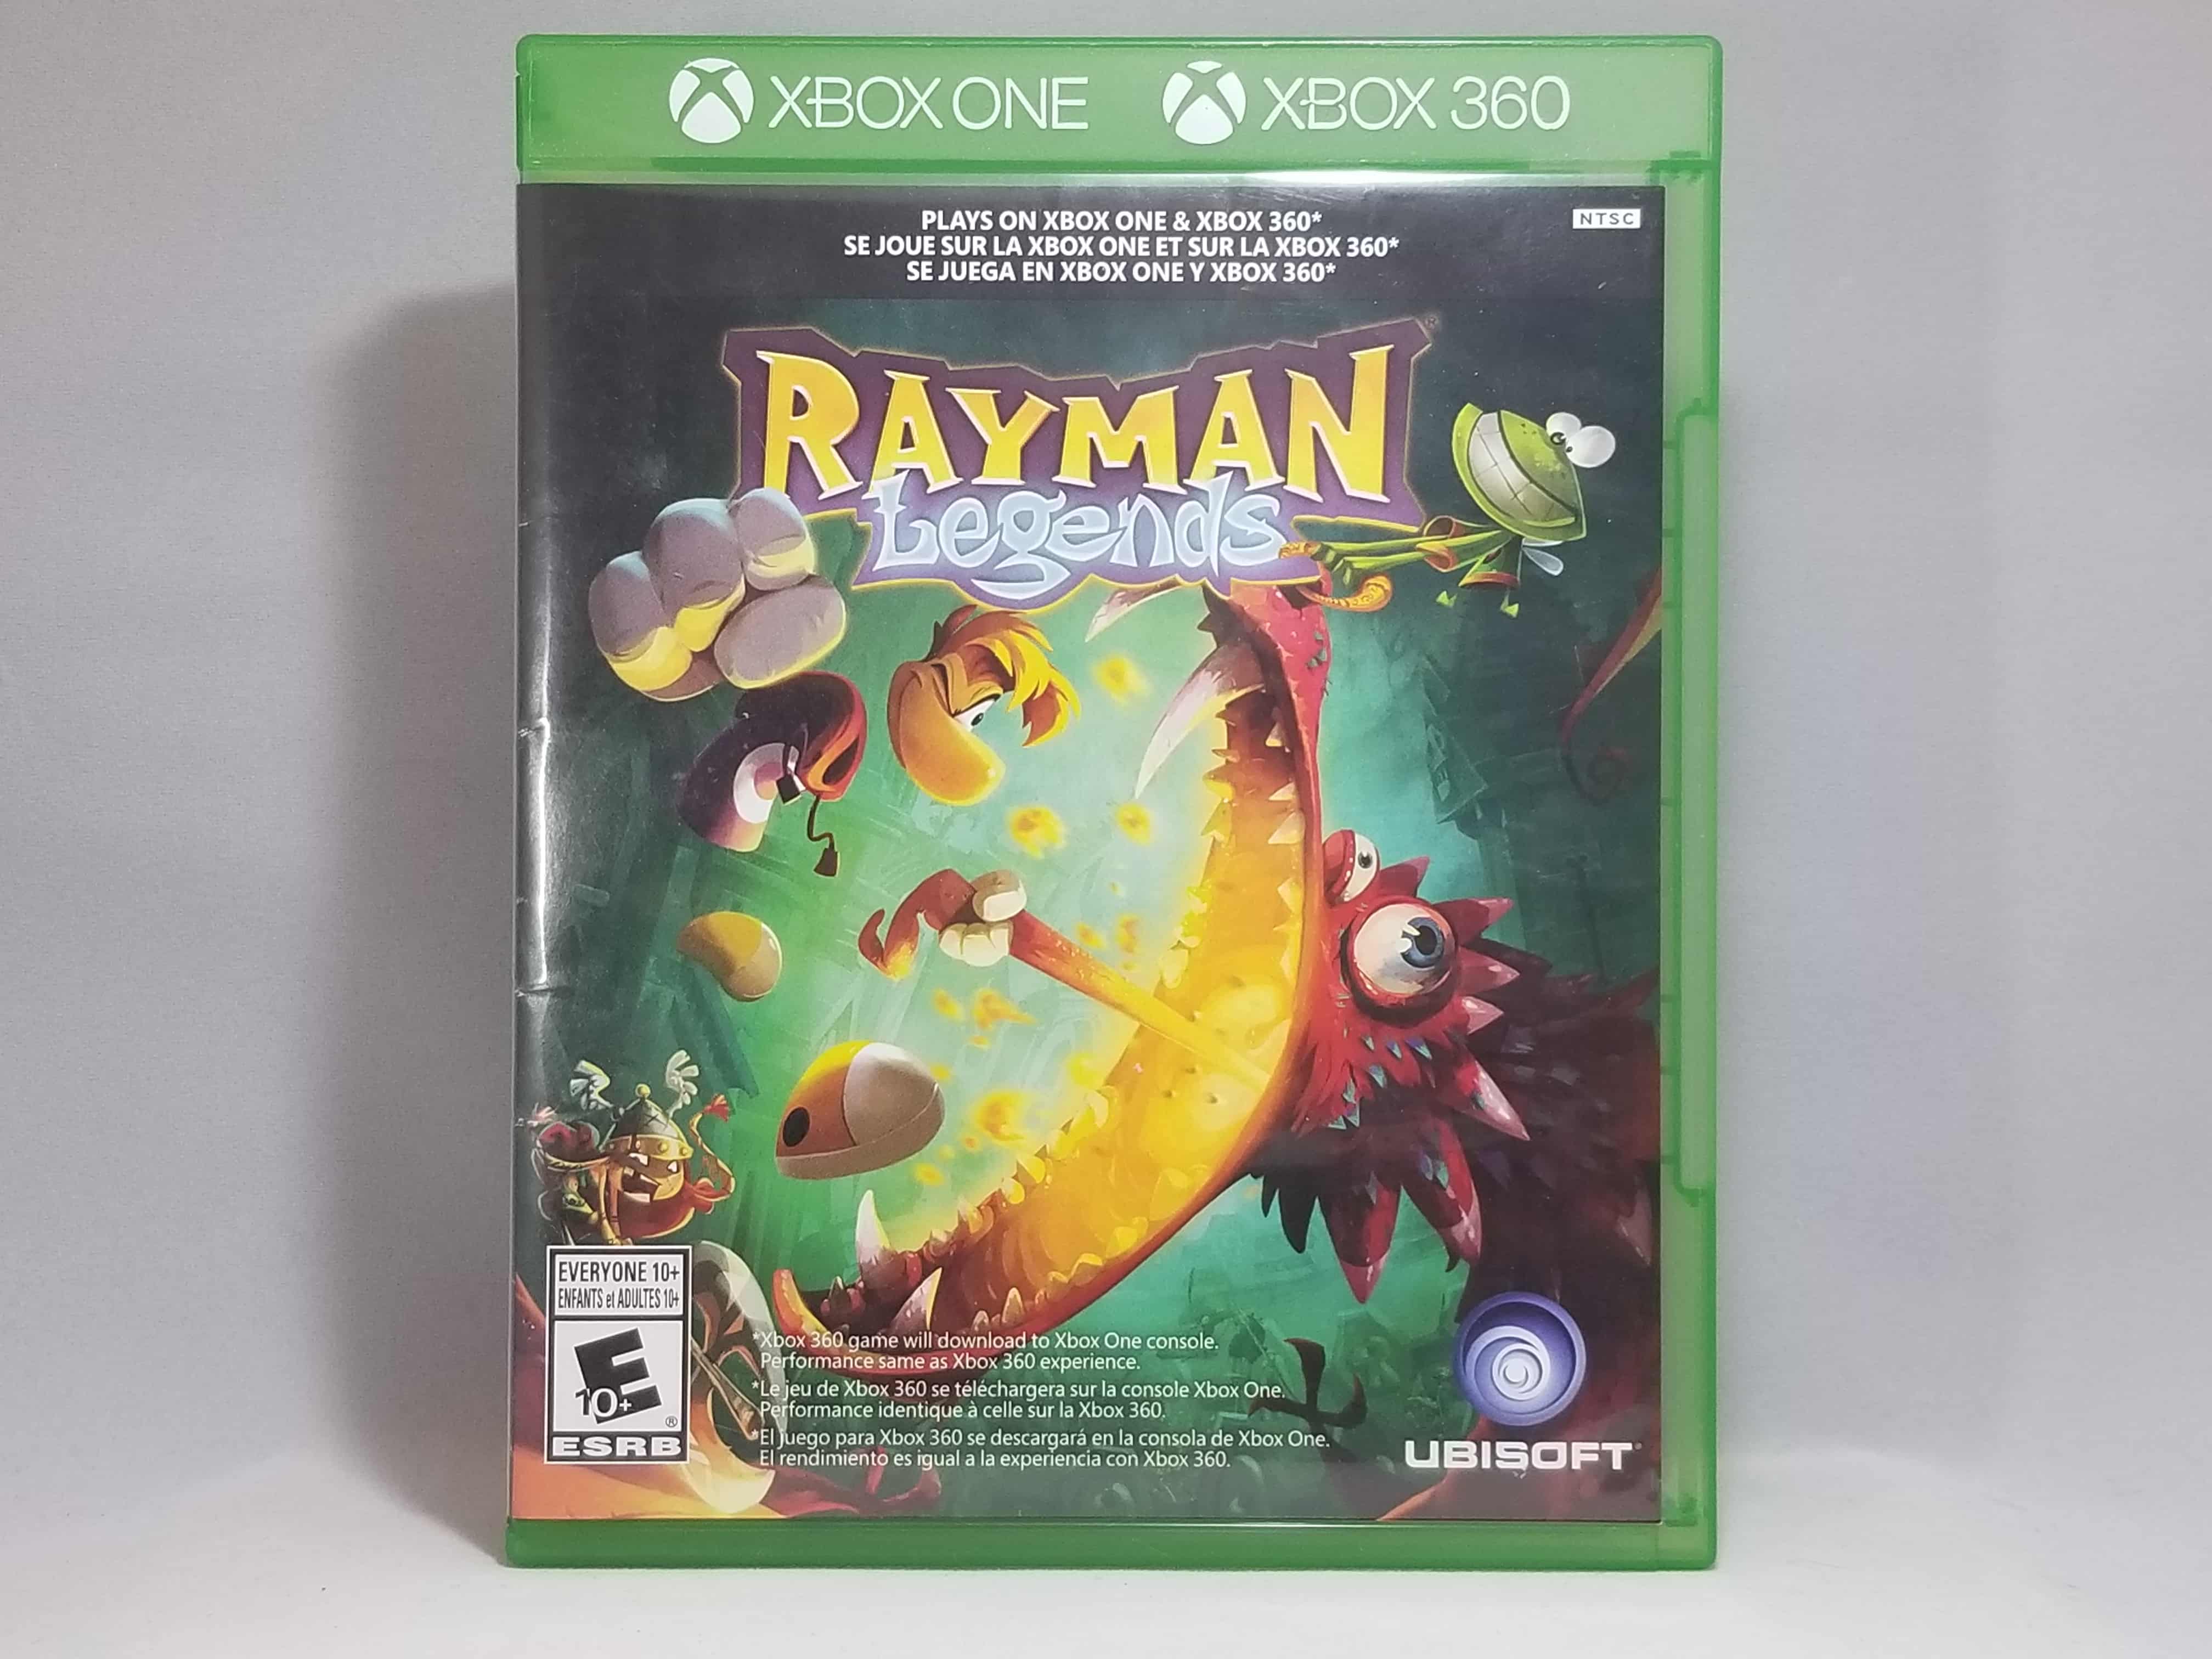 Rayman Legends out to download on Xbox One!